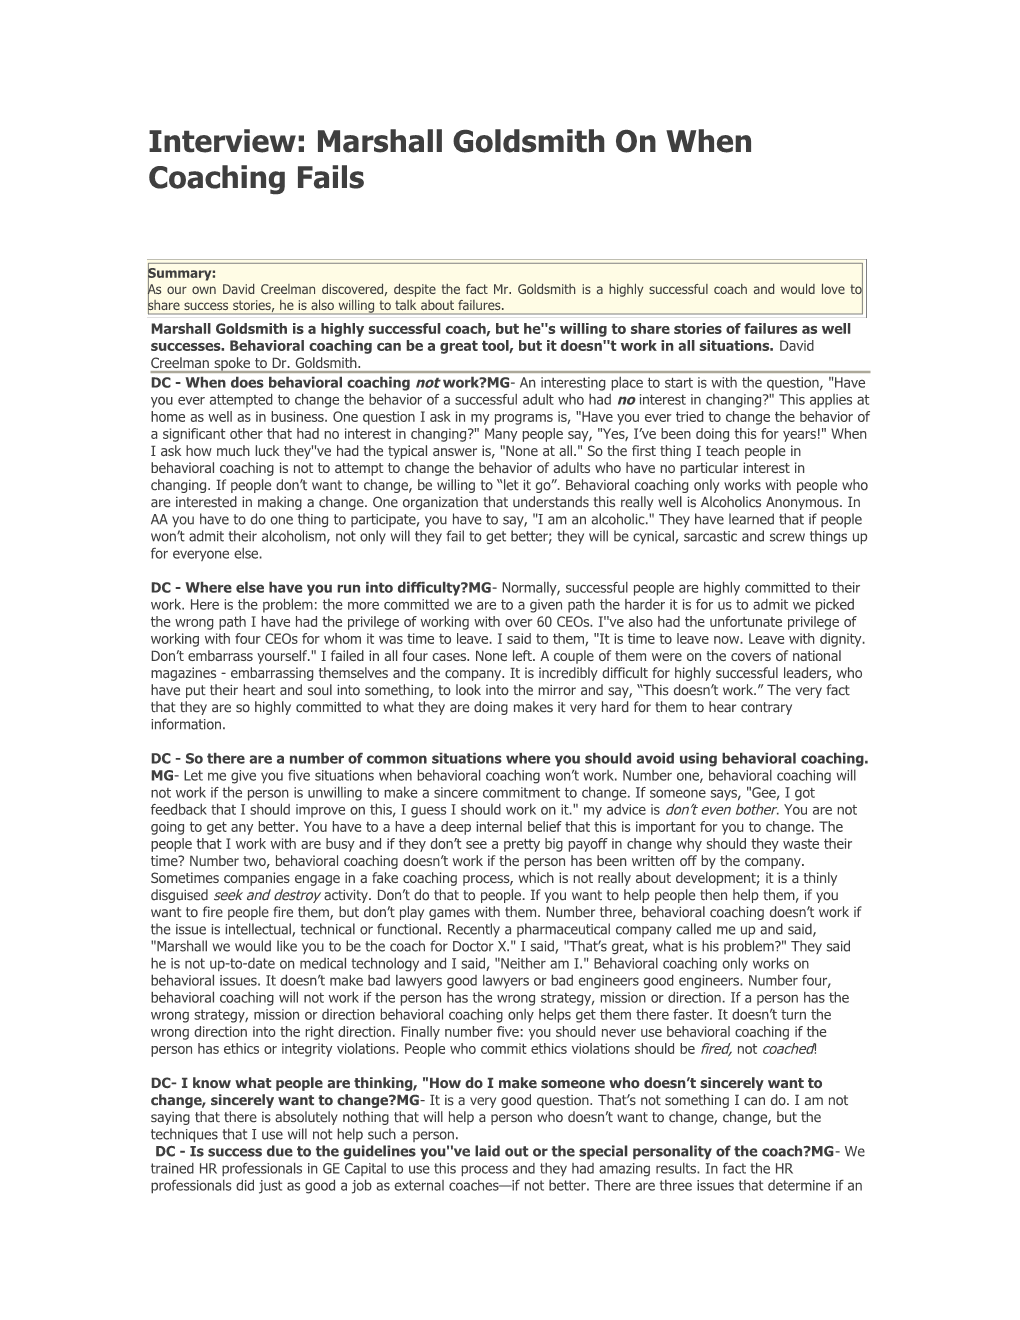 Interview: Marshall Goldsmith on When Coaching Fails